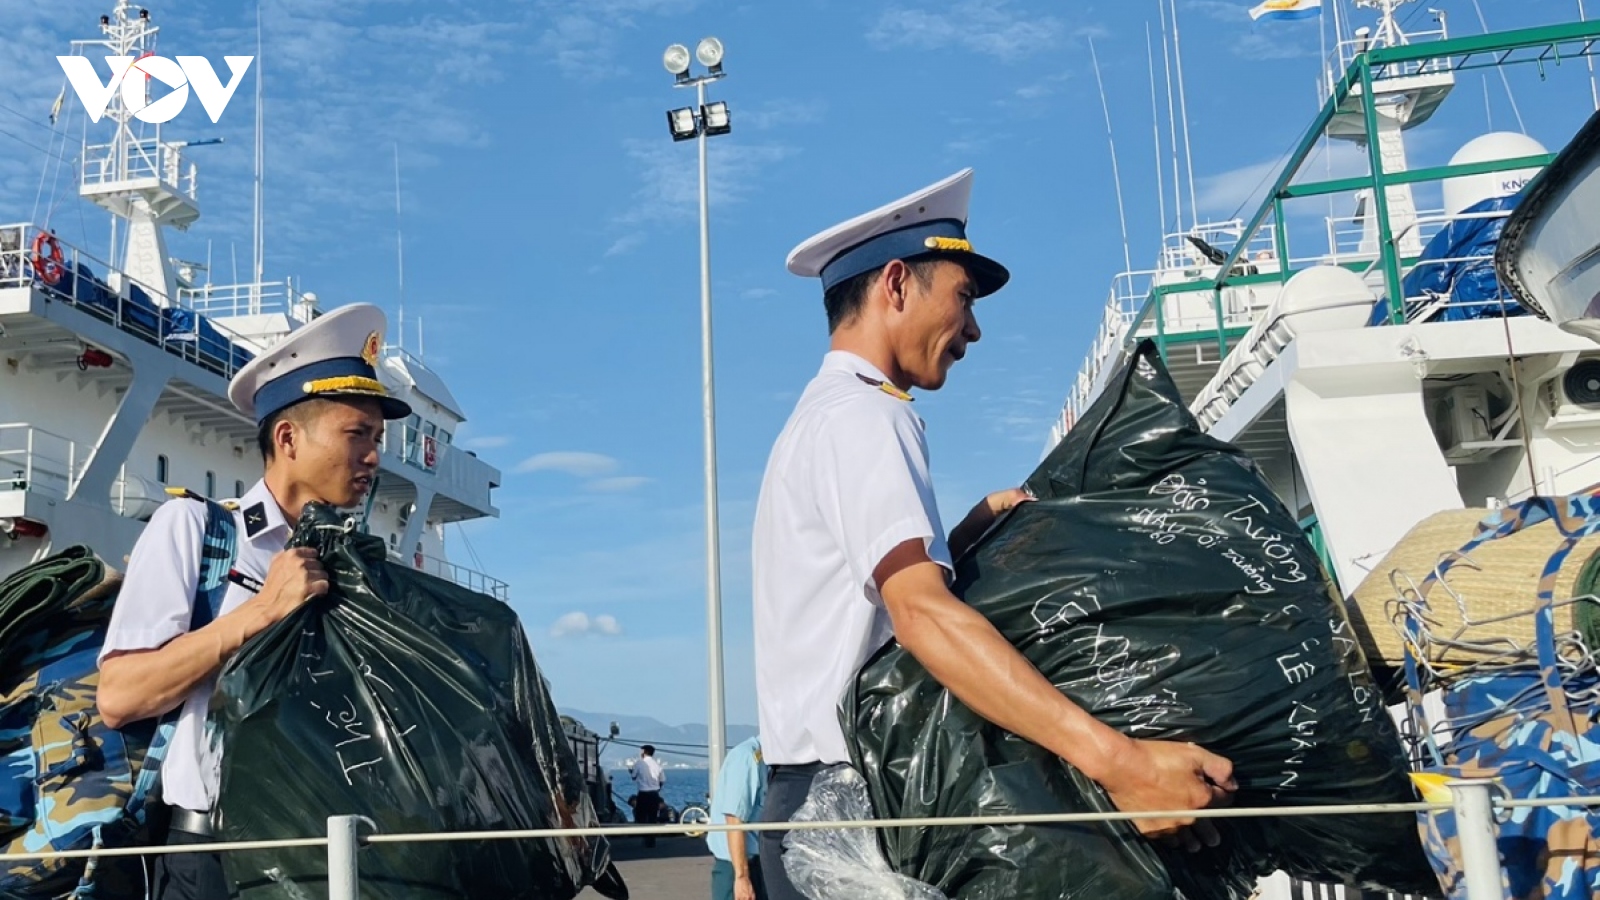 Food for thought for Spratly islanders and soldiers ahead of lunar New Year